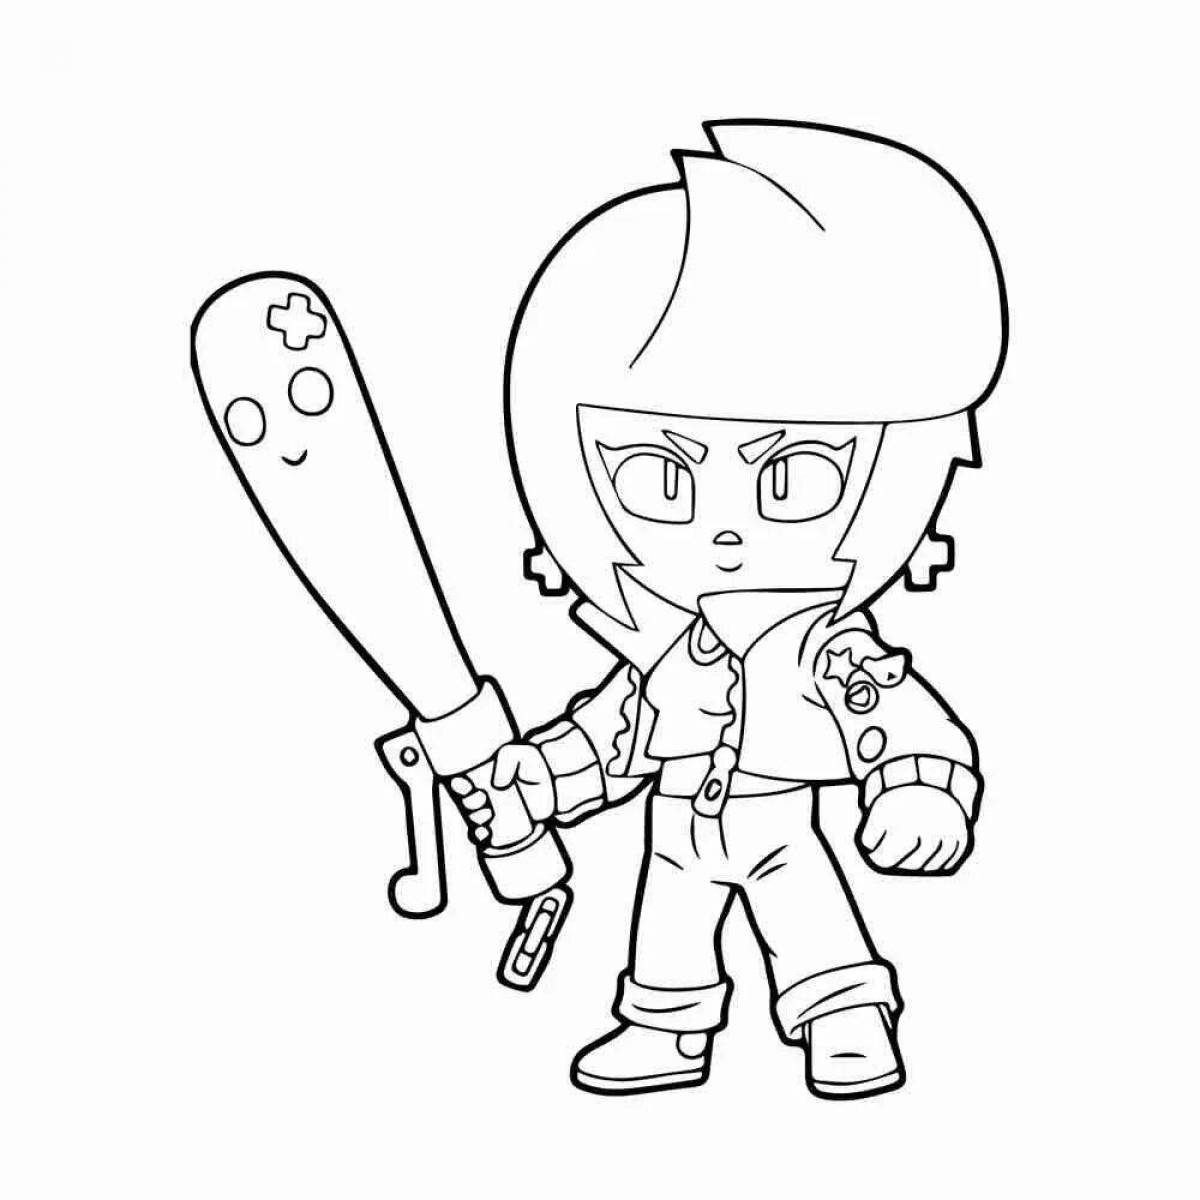 Exciting coloring brawl stars all brawlers coloring page